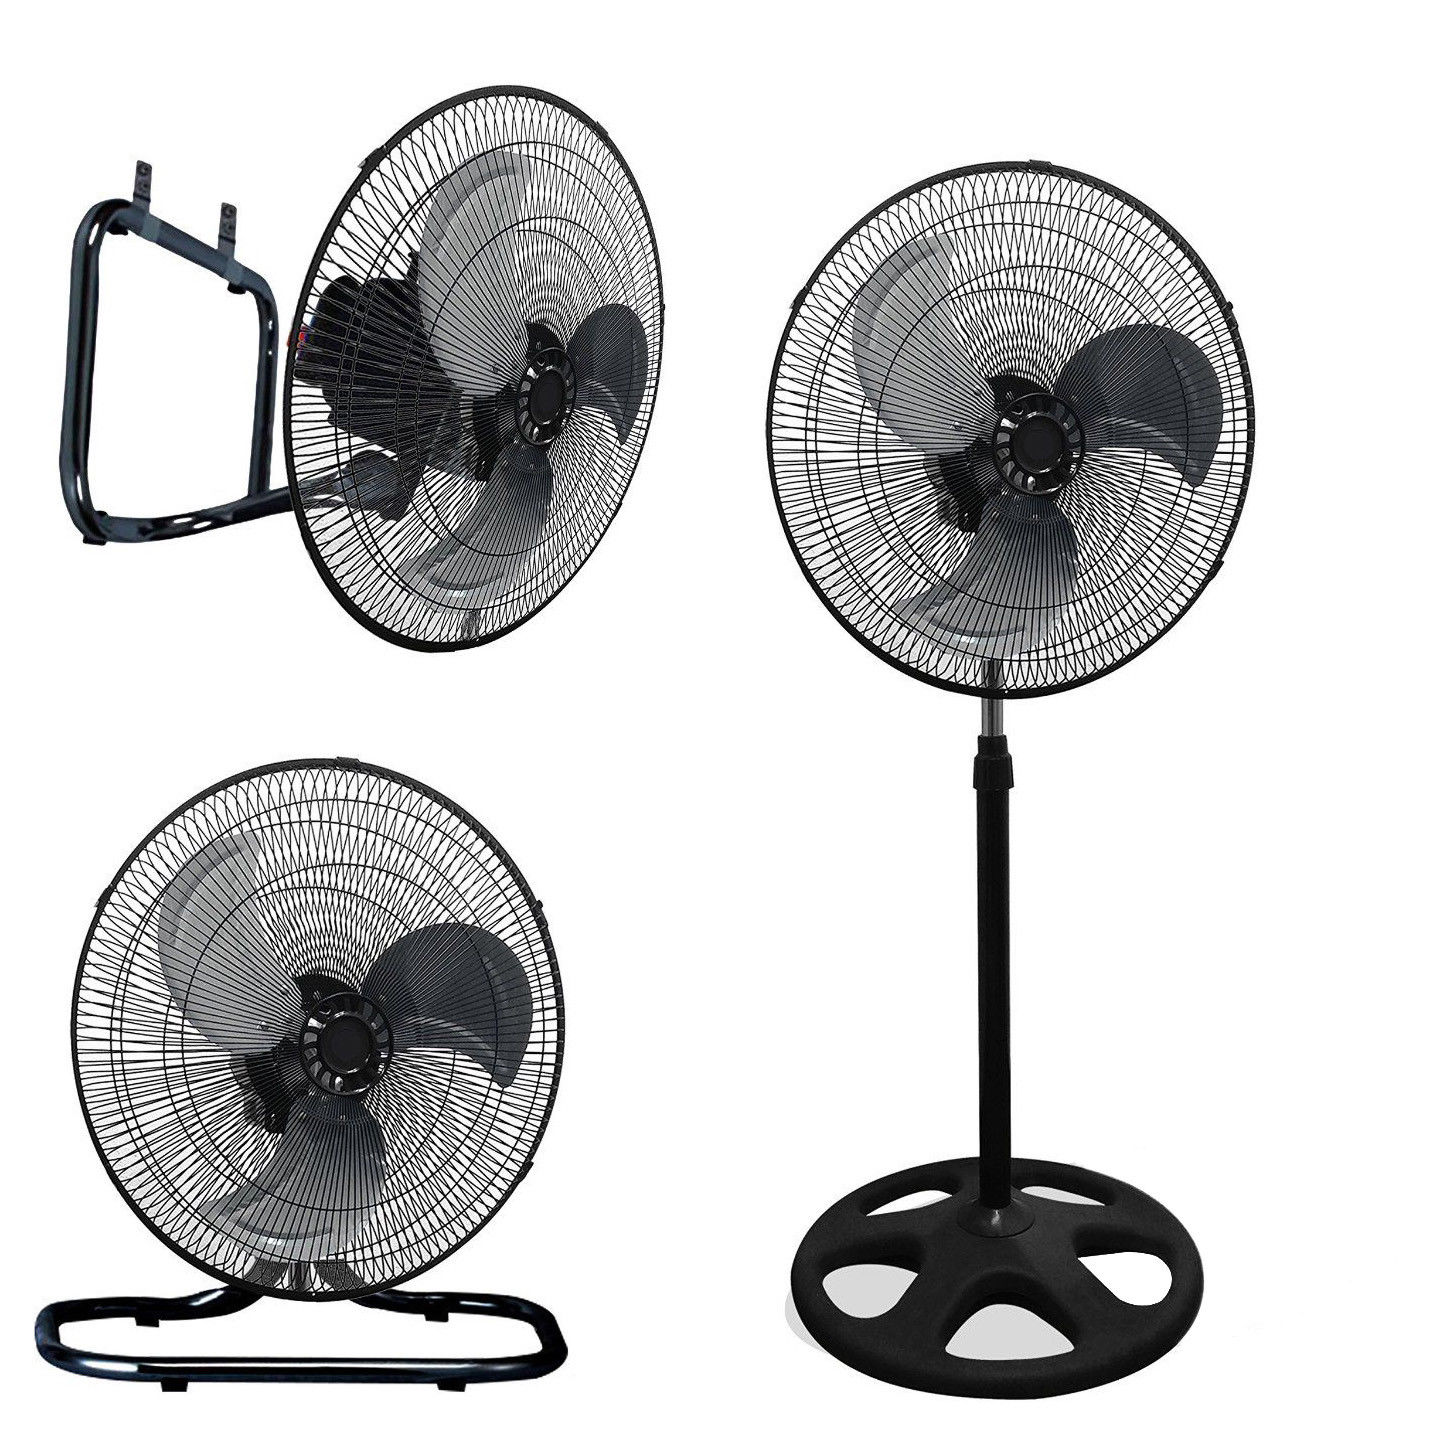 MULTI-USE 2 SPEED OSCILLATING FAN STAND UP WALL MOUNT OR CLIP ON CIRCULATING 7" 